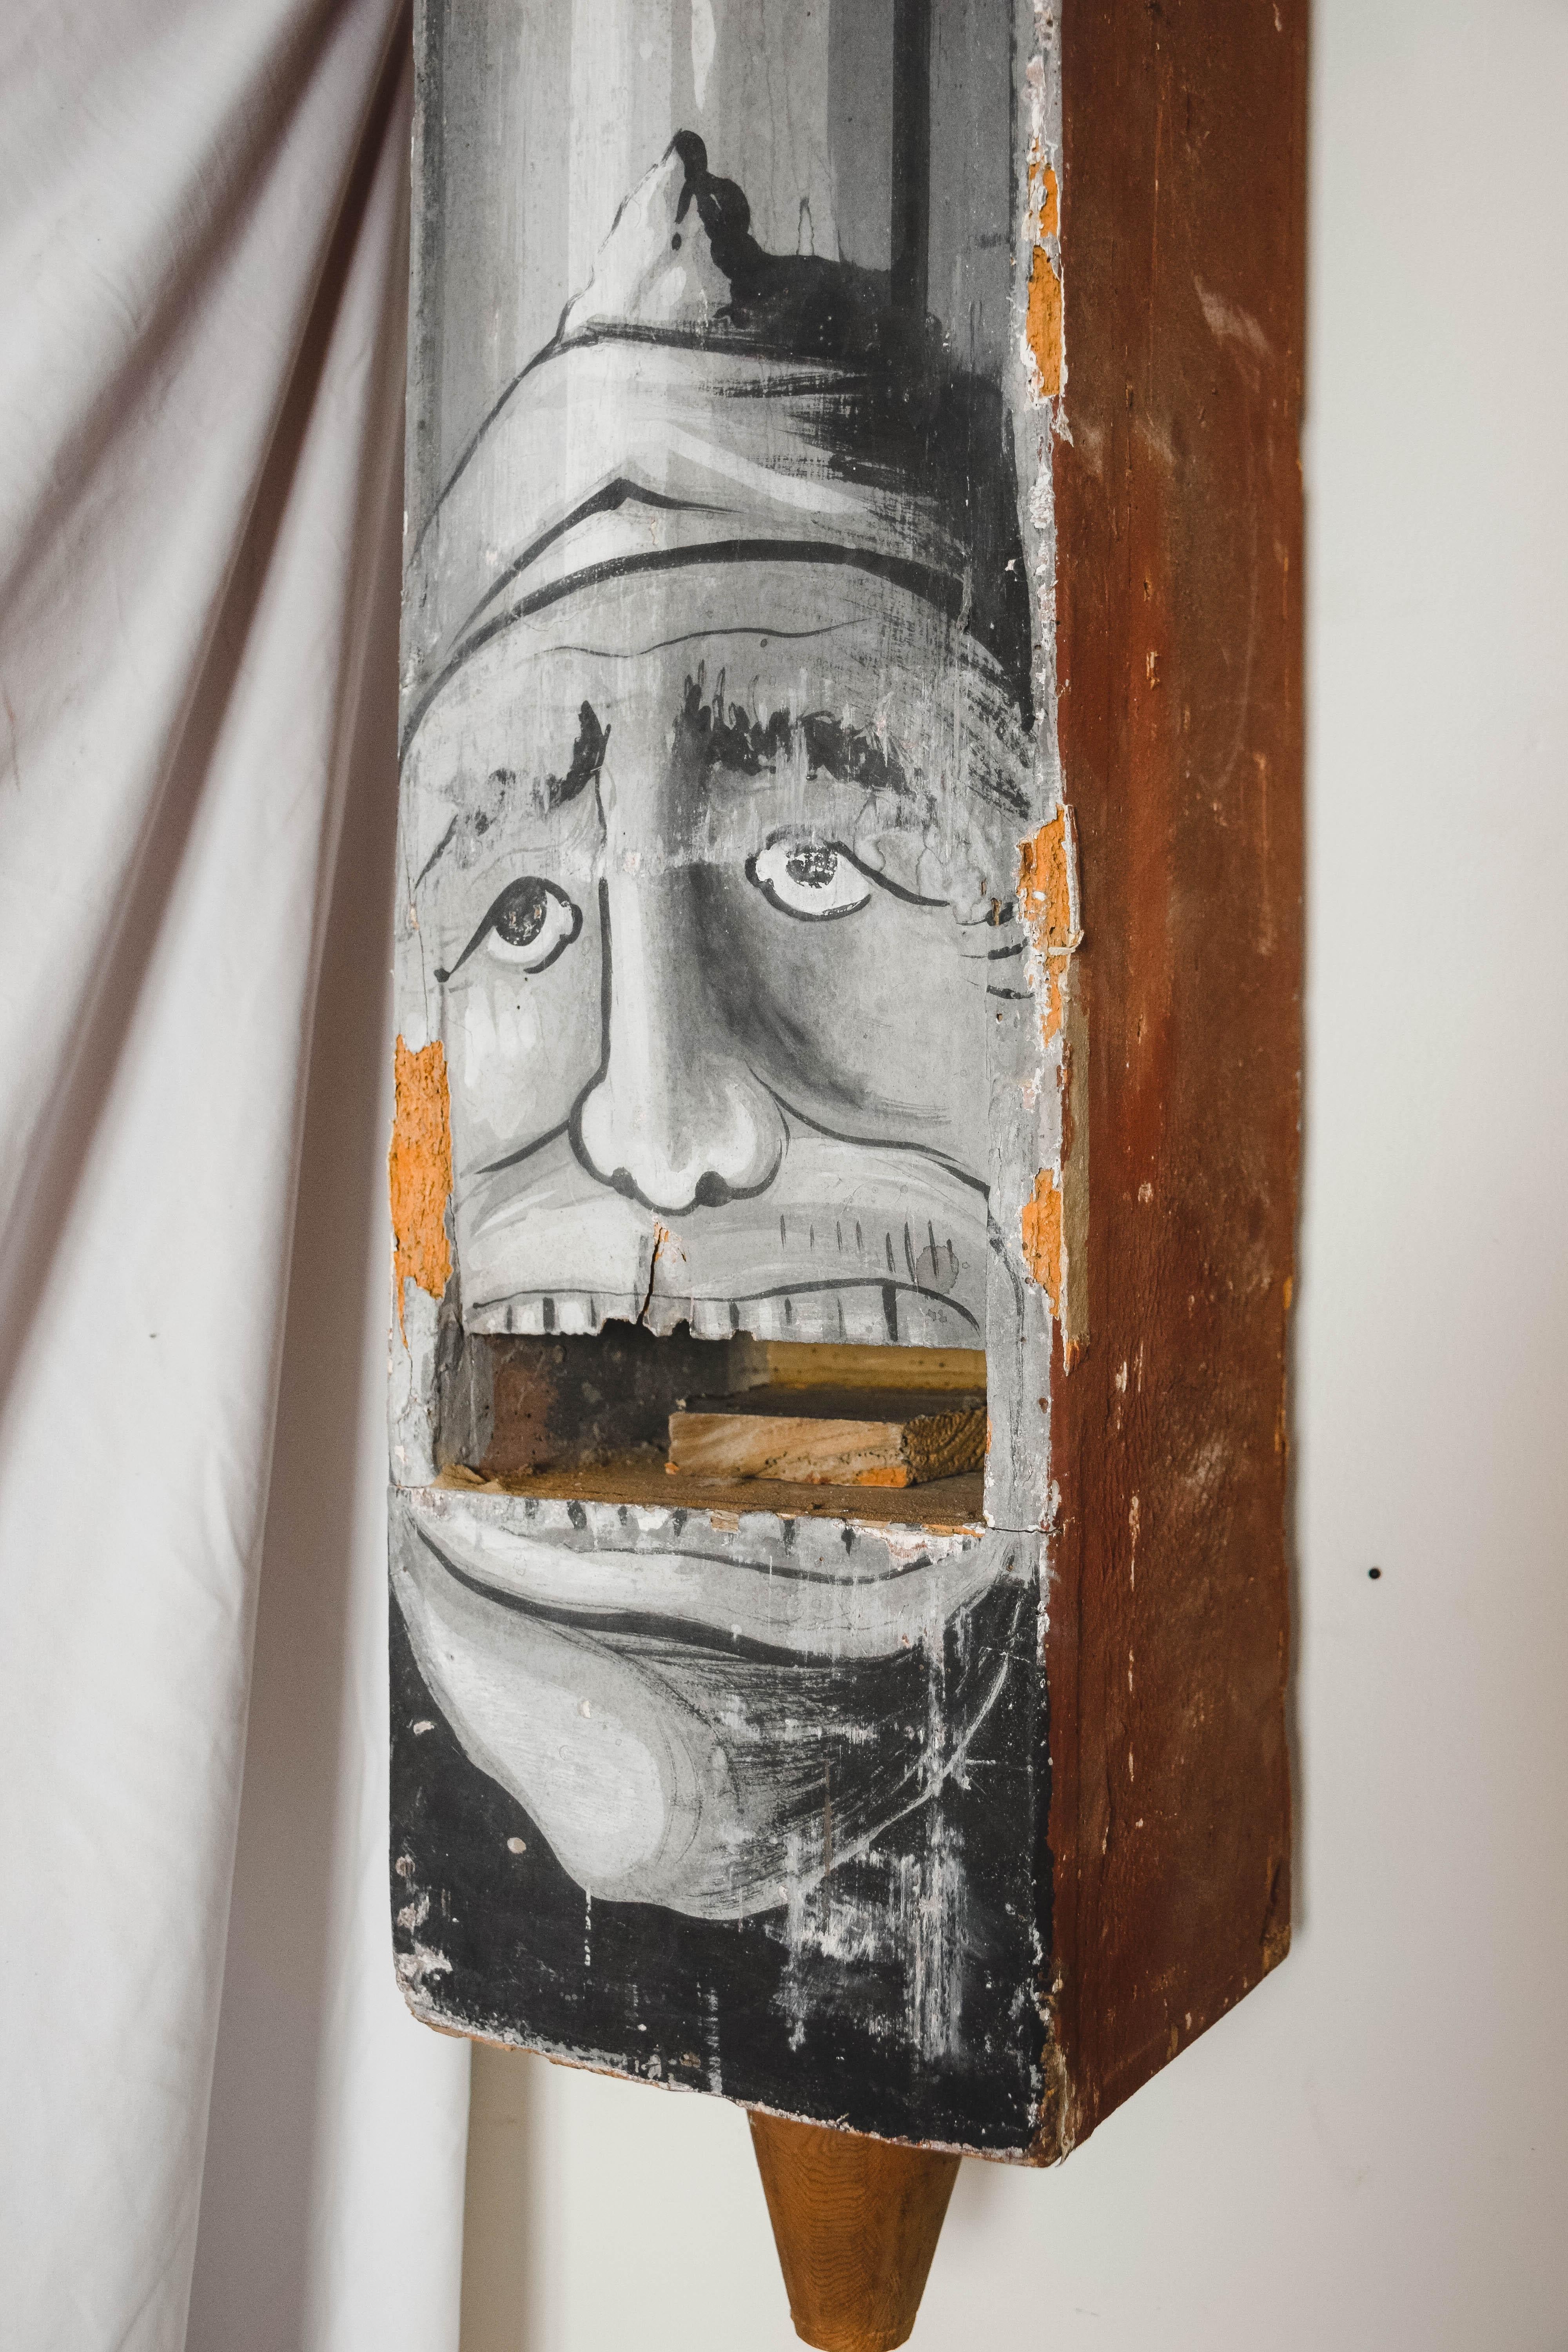 We found this very large whimsical antique wood organ pipe case in Spain, however we are uncertain of its origin. The pipes may be vertical and housed in a wooden case. The organ is often as arresting as their sound. Many are richly decorated with